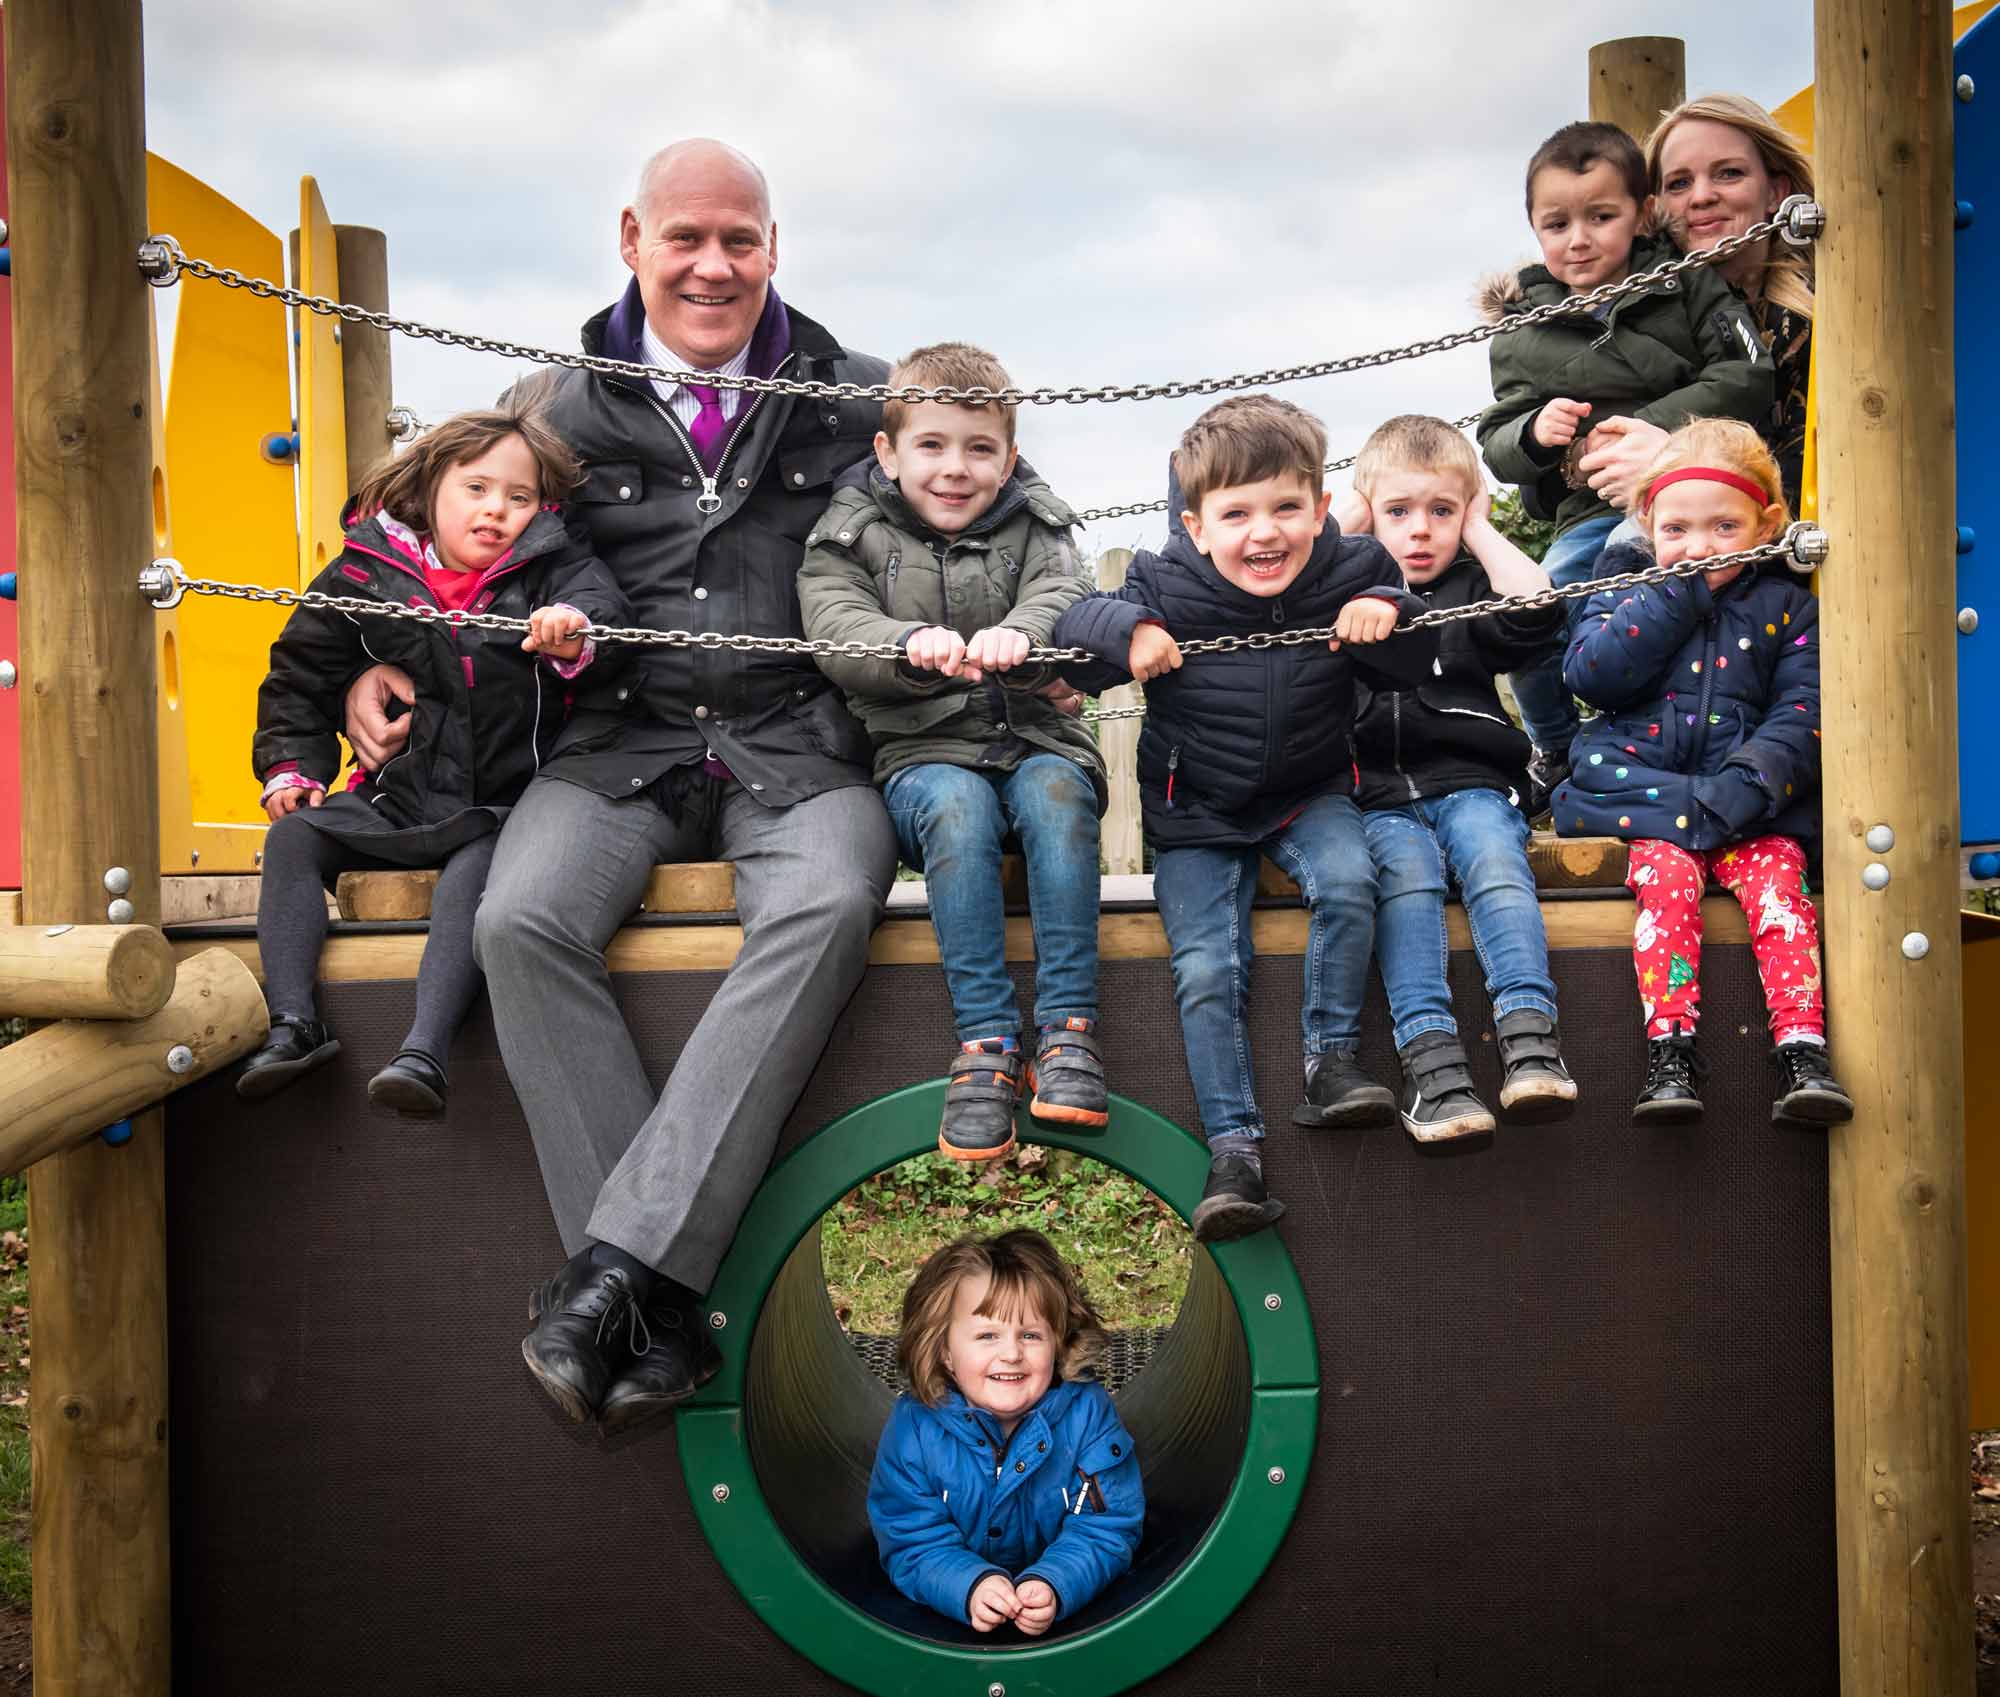 Jonathan Tearle, headteacher of Mowbray School, with some of his pupils